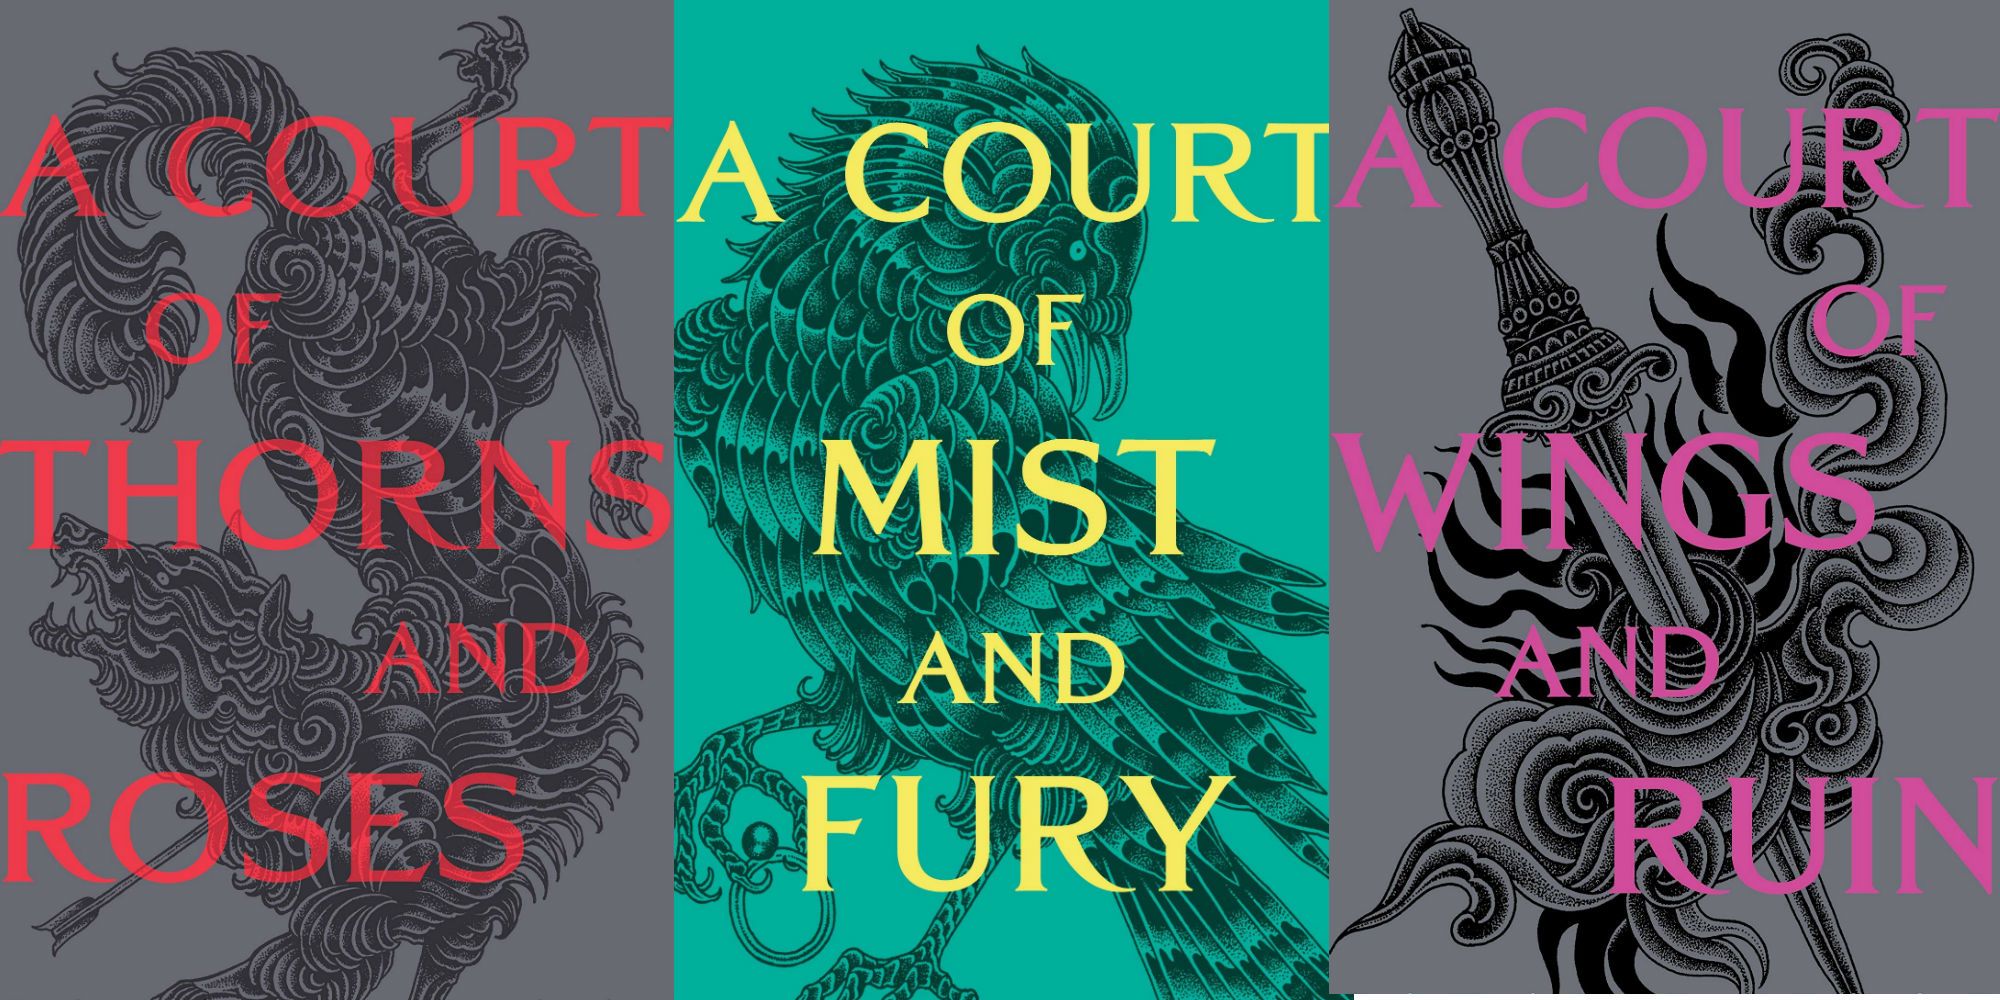 Sarah J Maas A Court Of Thorns And Roses book series